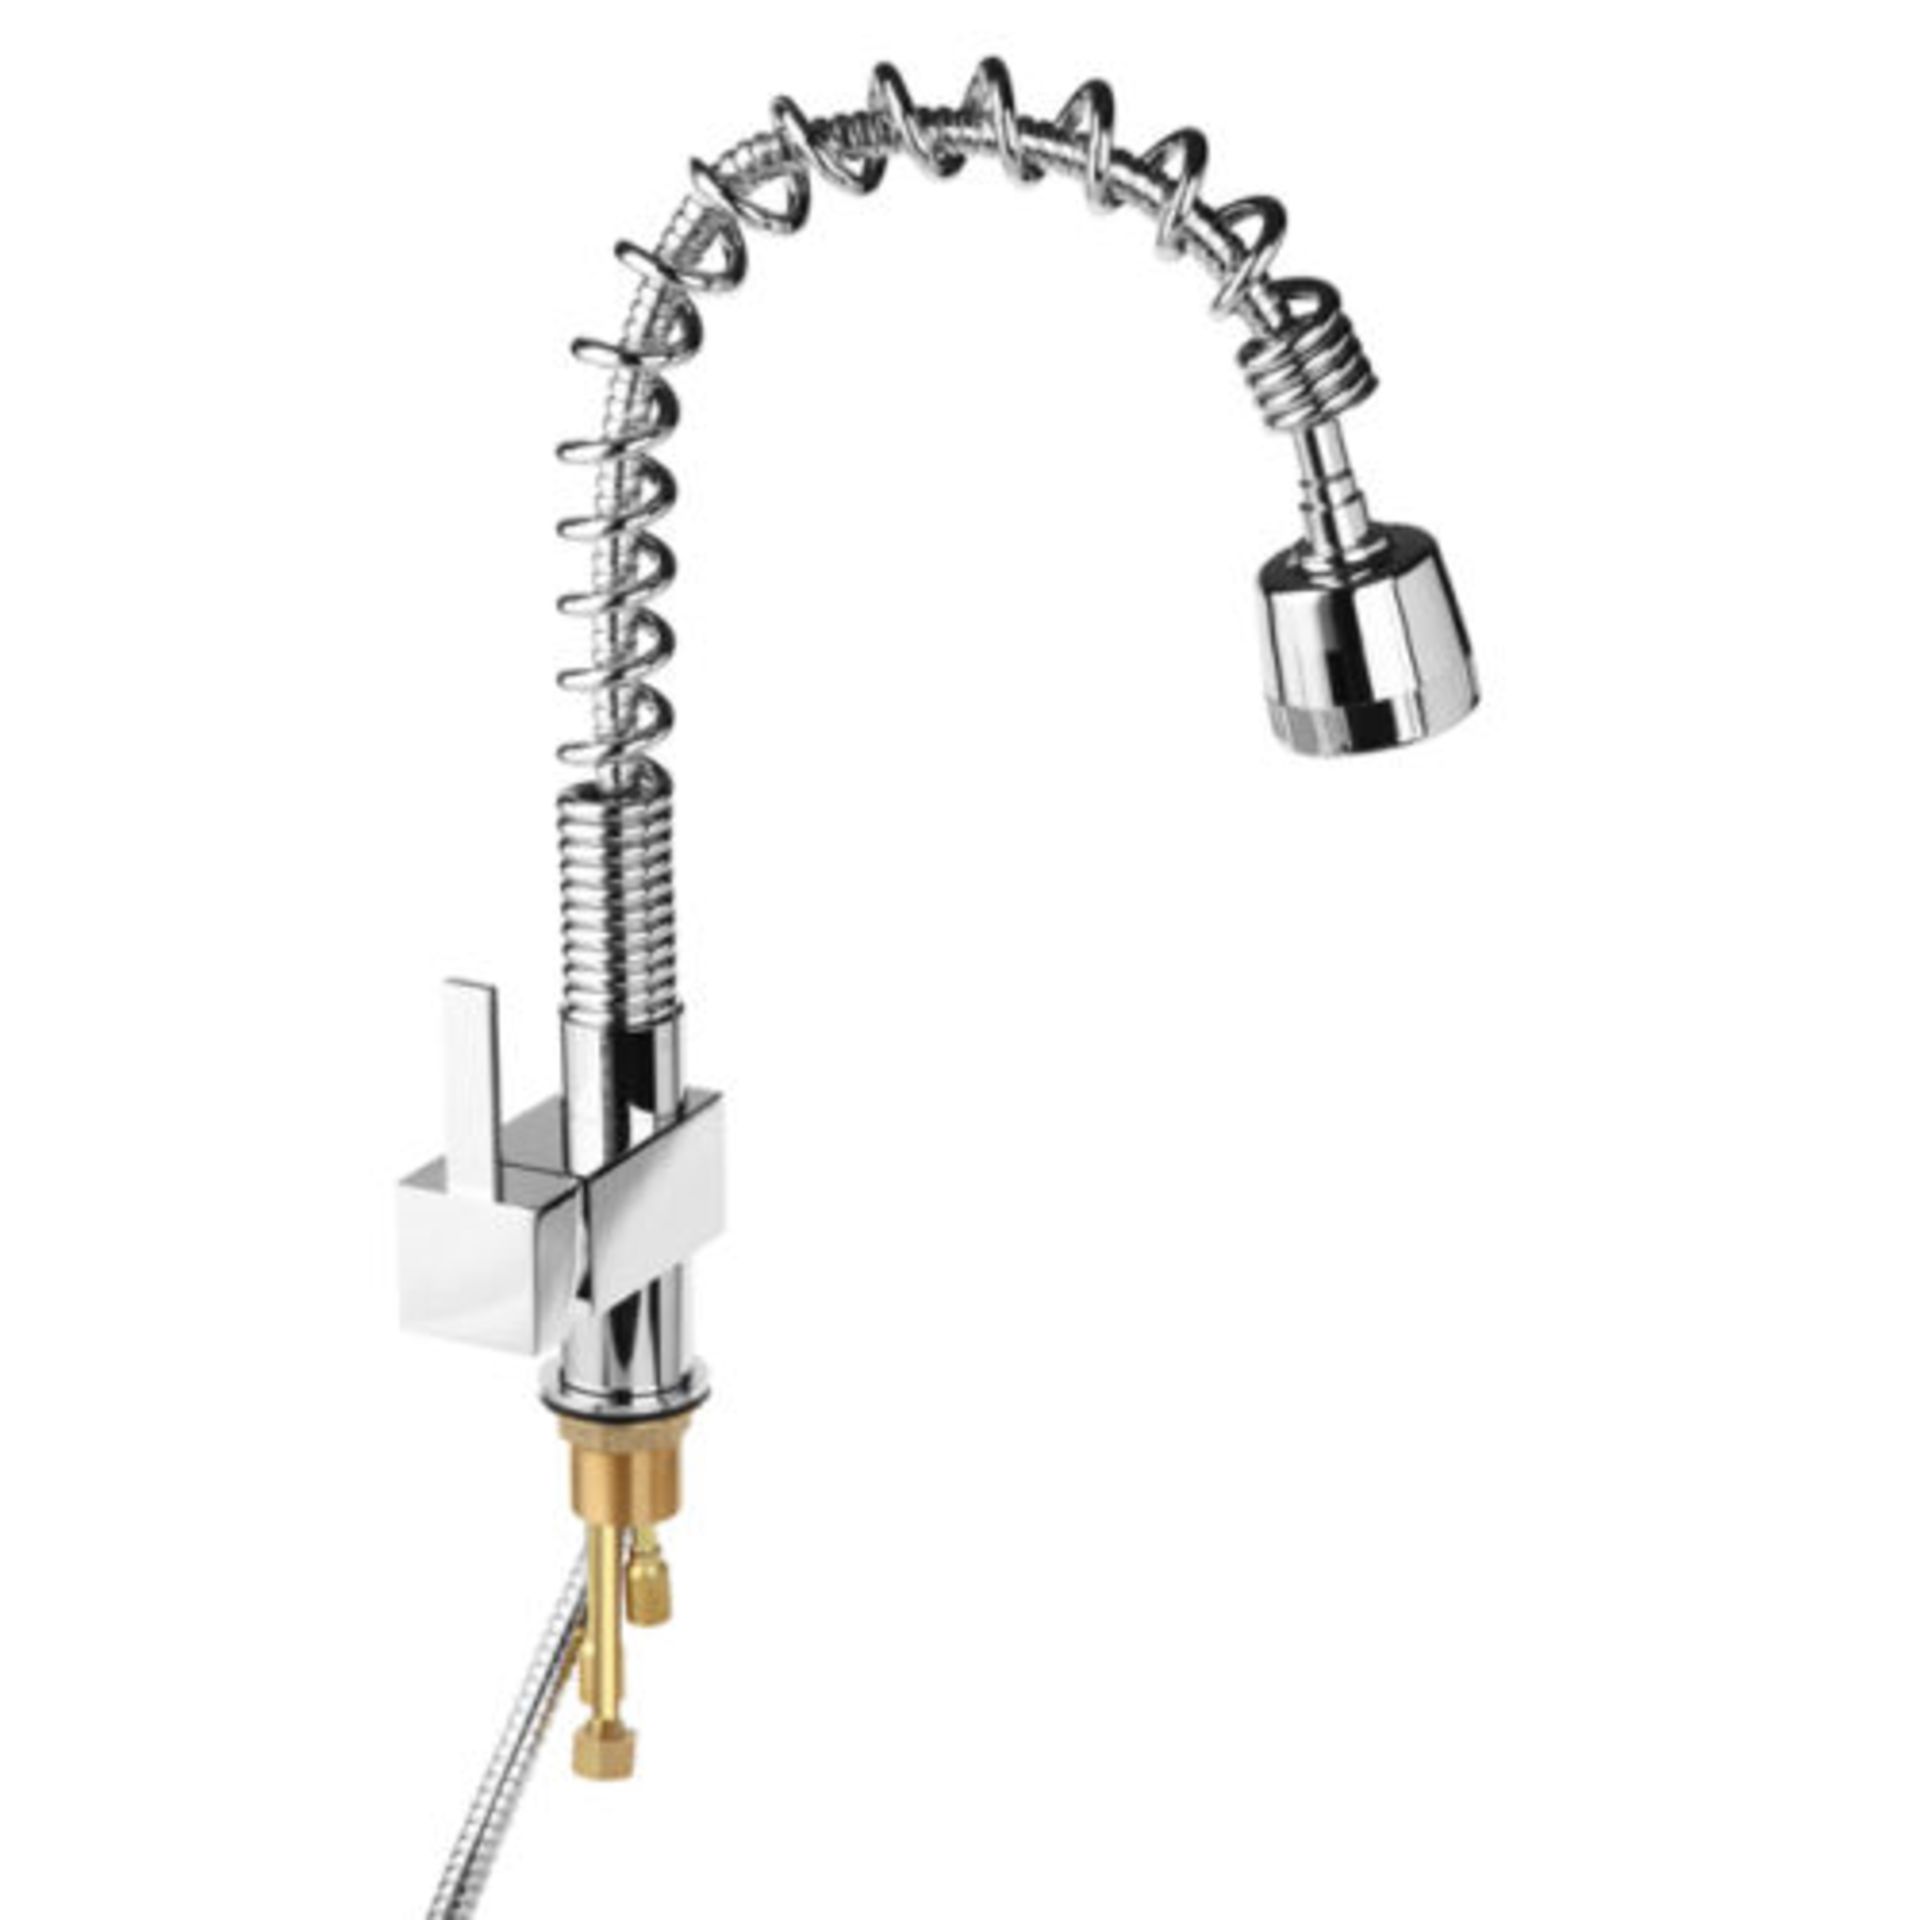 (O189) Maddie Brushed Chrome Monobloc Kitchen Tap Swivel Pull Out Spray Mixer. RRP £219.99. - Image 2 of 2